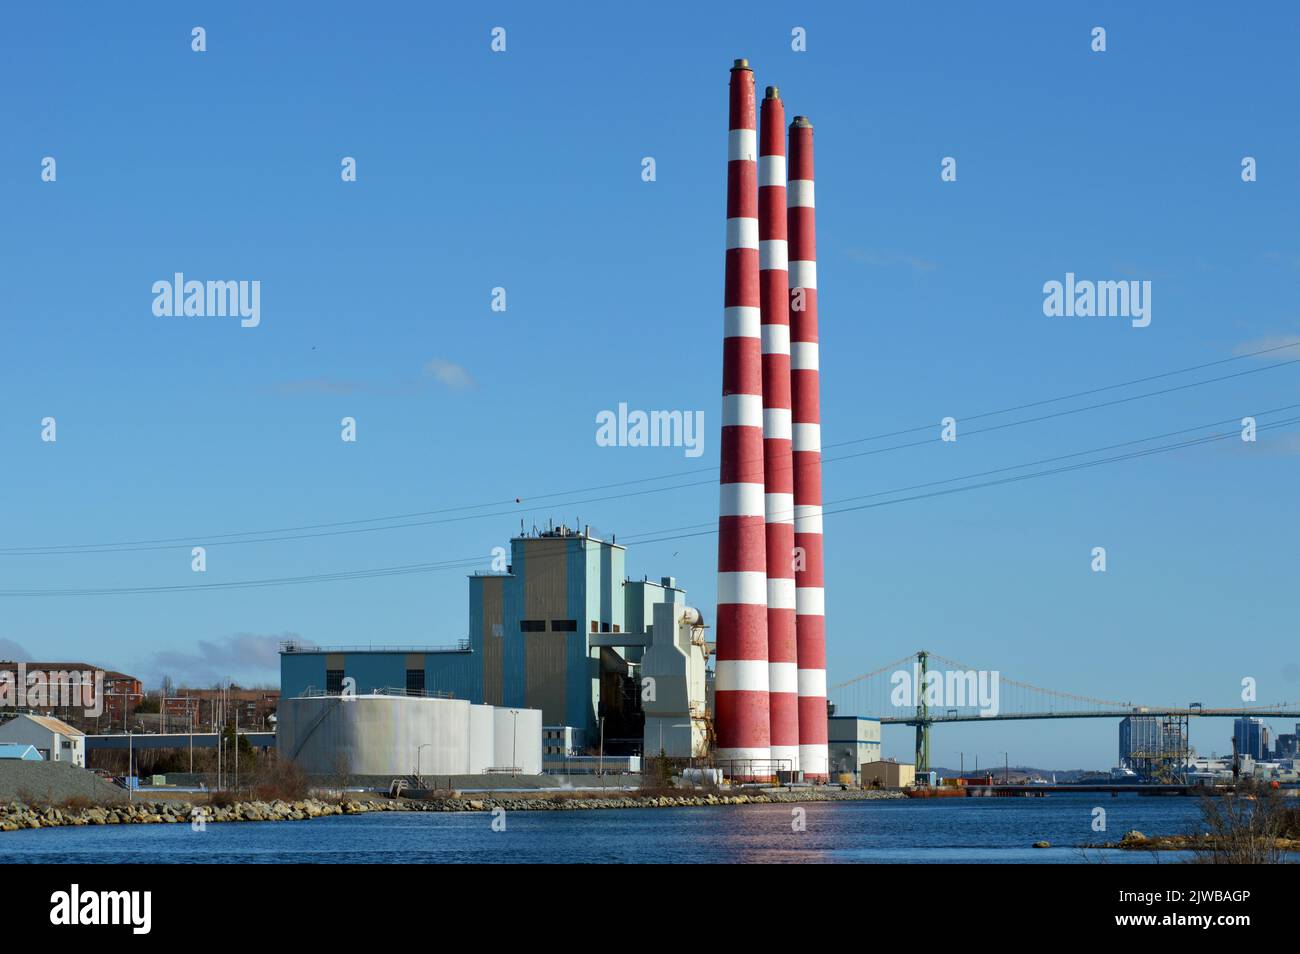 Tufts Cove Generating Station in Dartmouth, Nova Scotia, Canada, a Nova Scotia Power electricity generation plant commissioned in 1965. Stock Photo